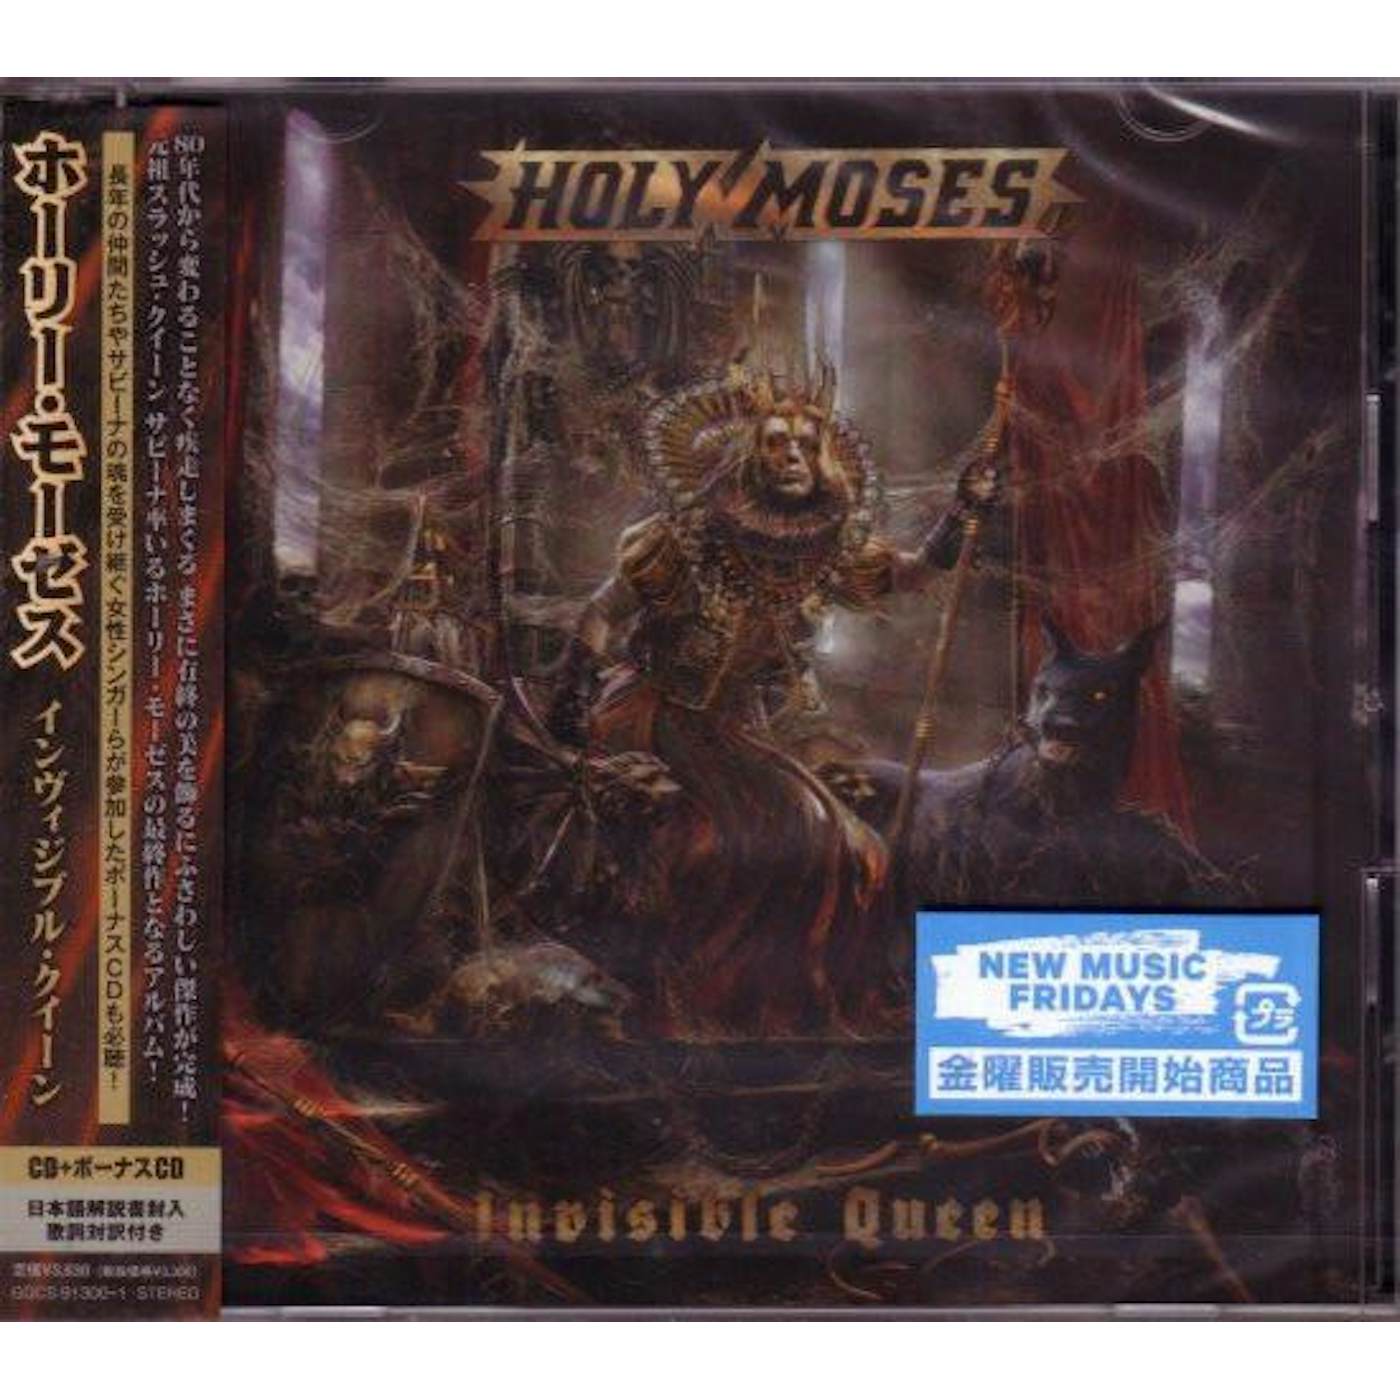 Holy Moses INVISIBLE QUEEN CD